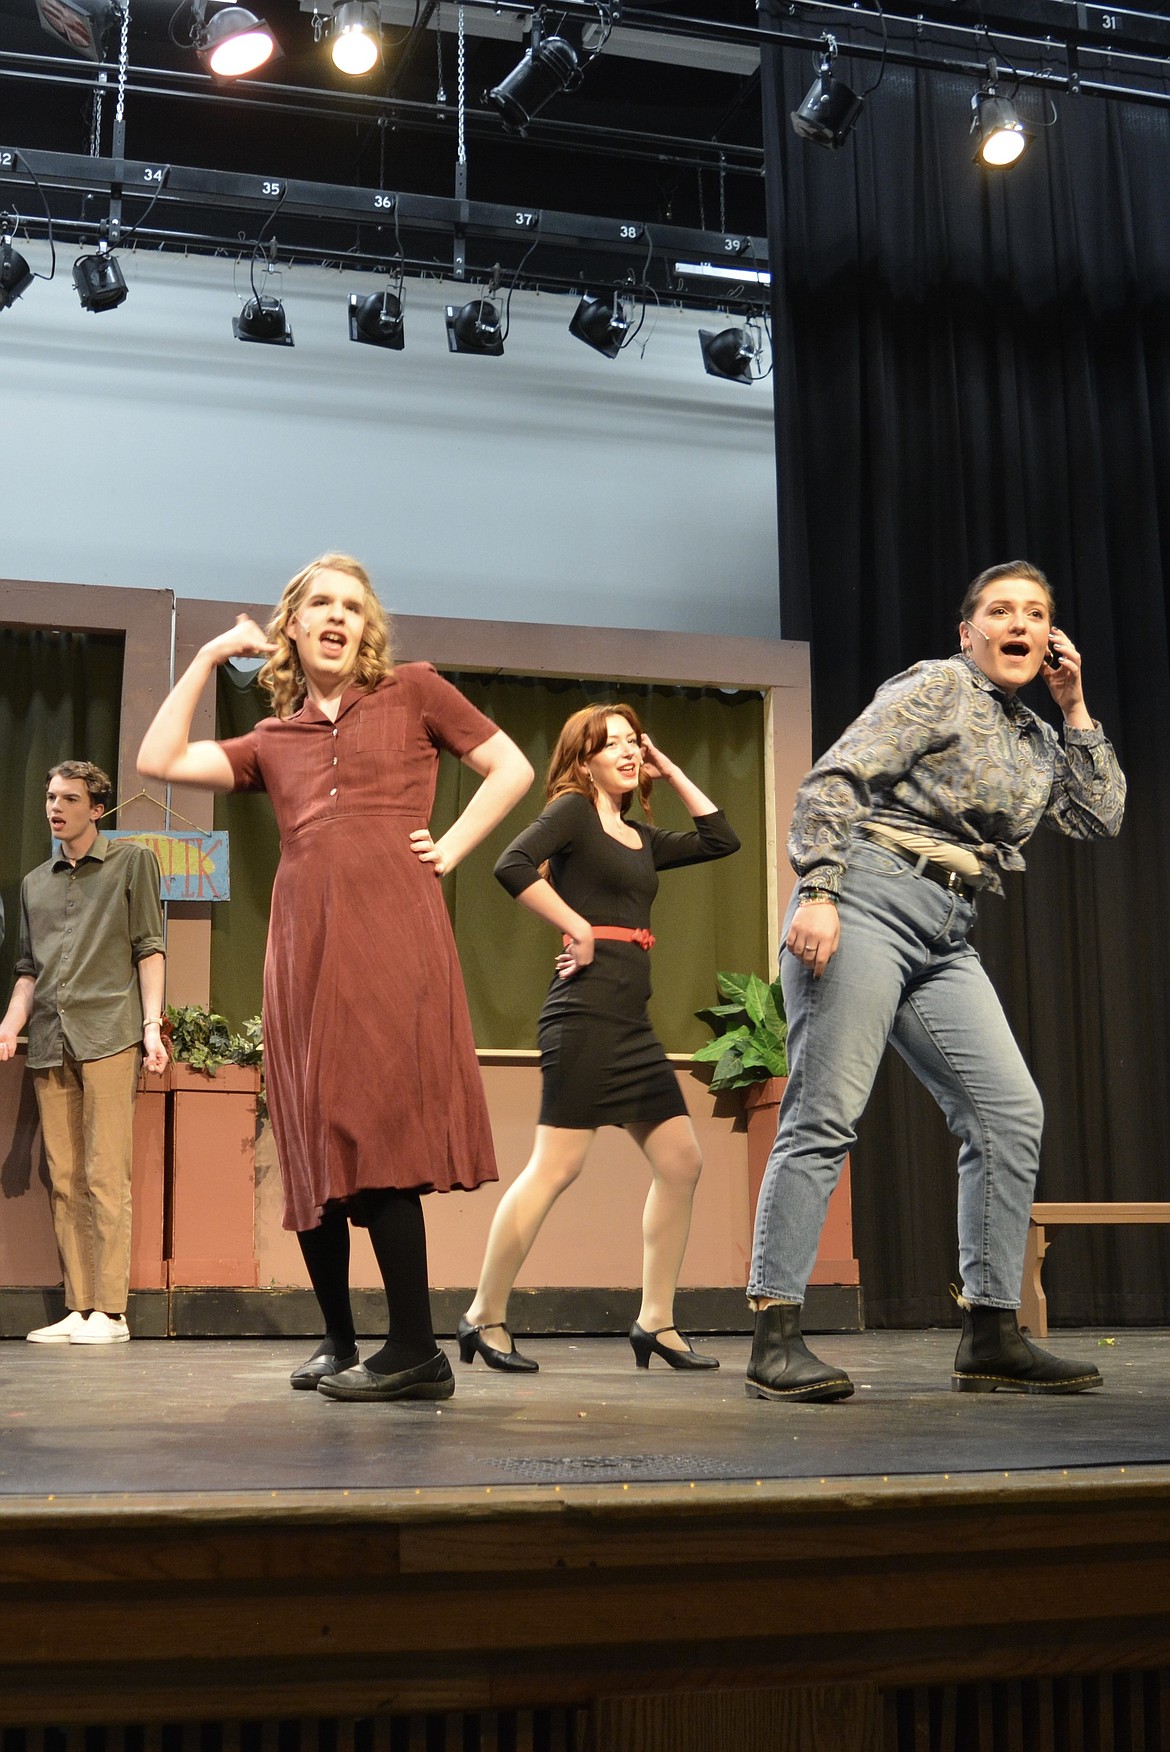 Lake City High School students dance and sing to the title number of "Little Shop of Horrors" to warm up before a performance. From left, Tyson Karlinsey, Jadzia McConnell, Juno Otis and Rebekah Selby.